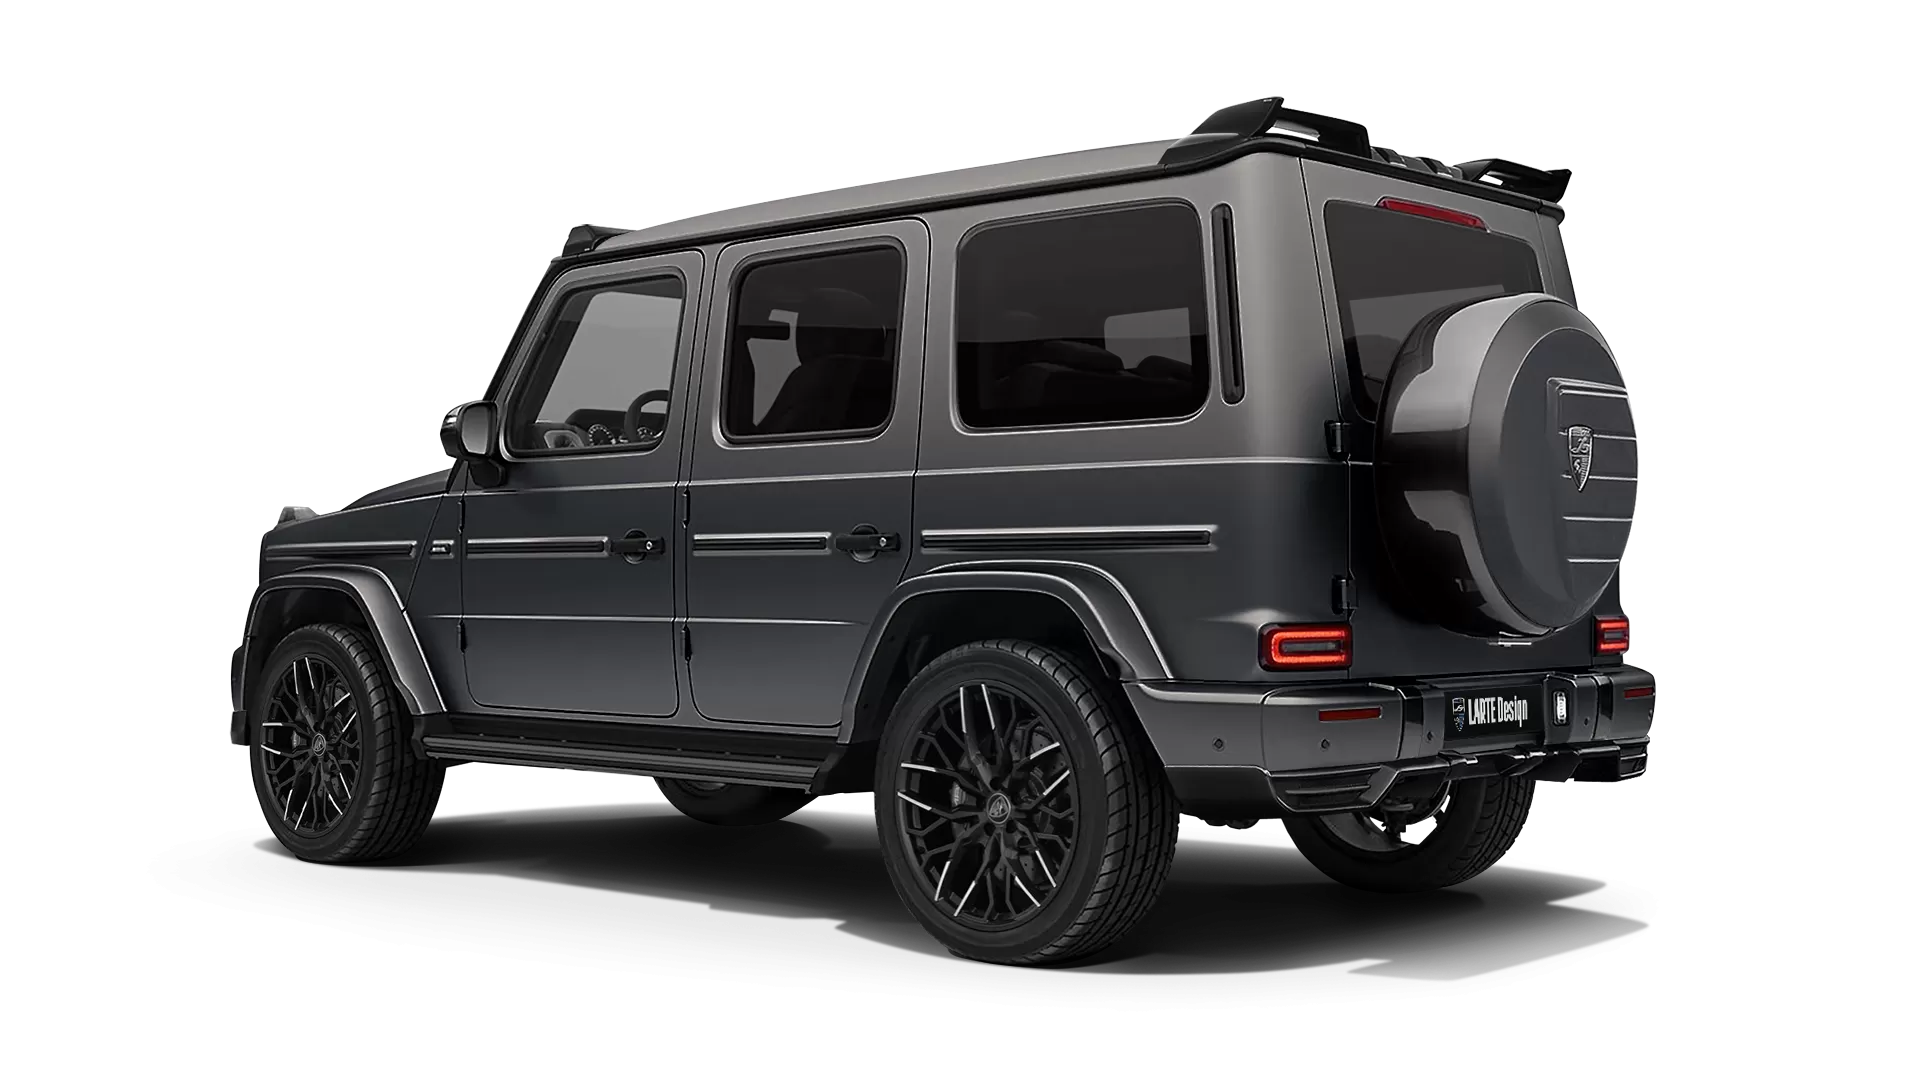 Mercedes G class W463 with painted body kit: rear view shown in Monza Grey Magno Latte